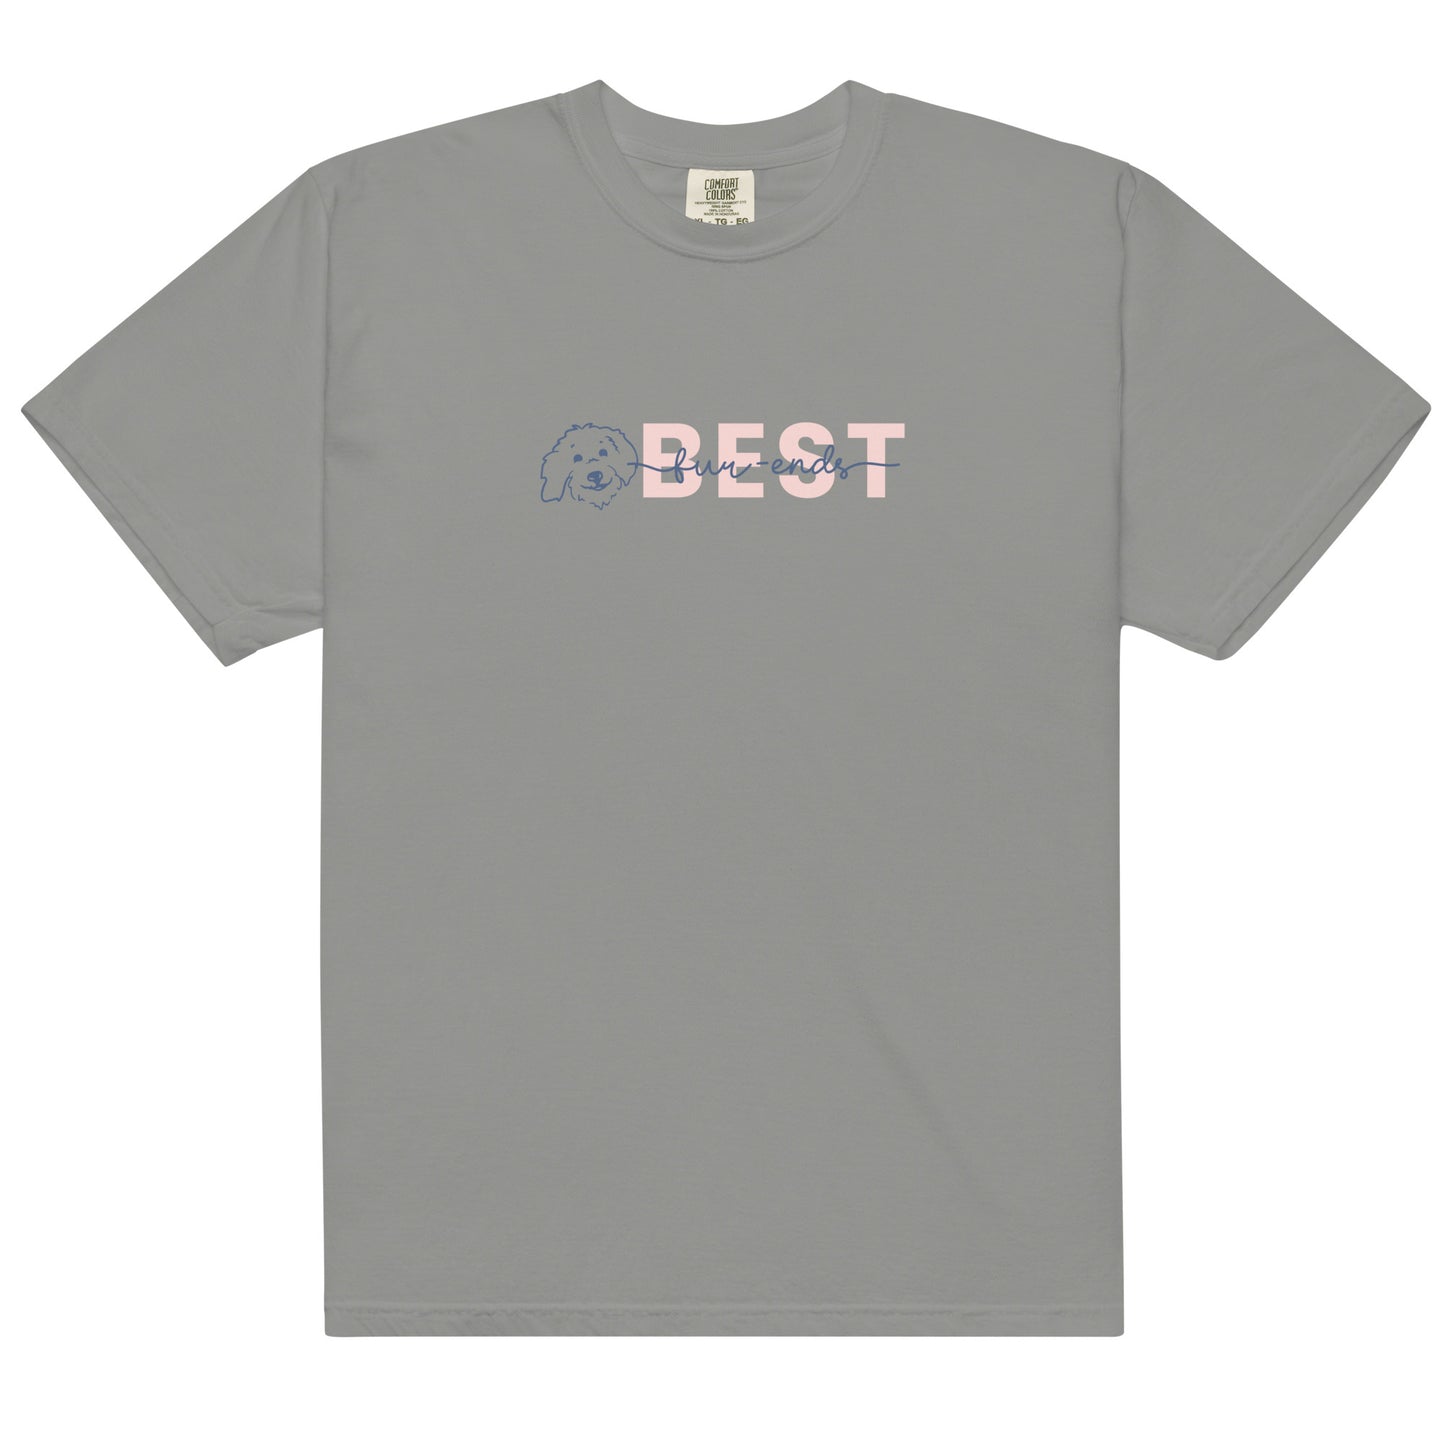 Goldendoodle t-shirt comfort colors with Goldendoodle face and words "Best fur-Ends" in grey color